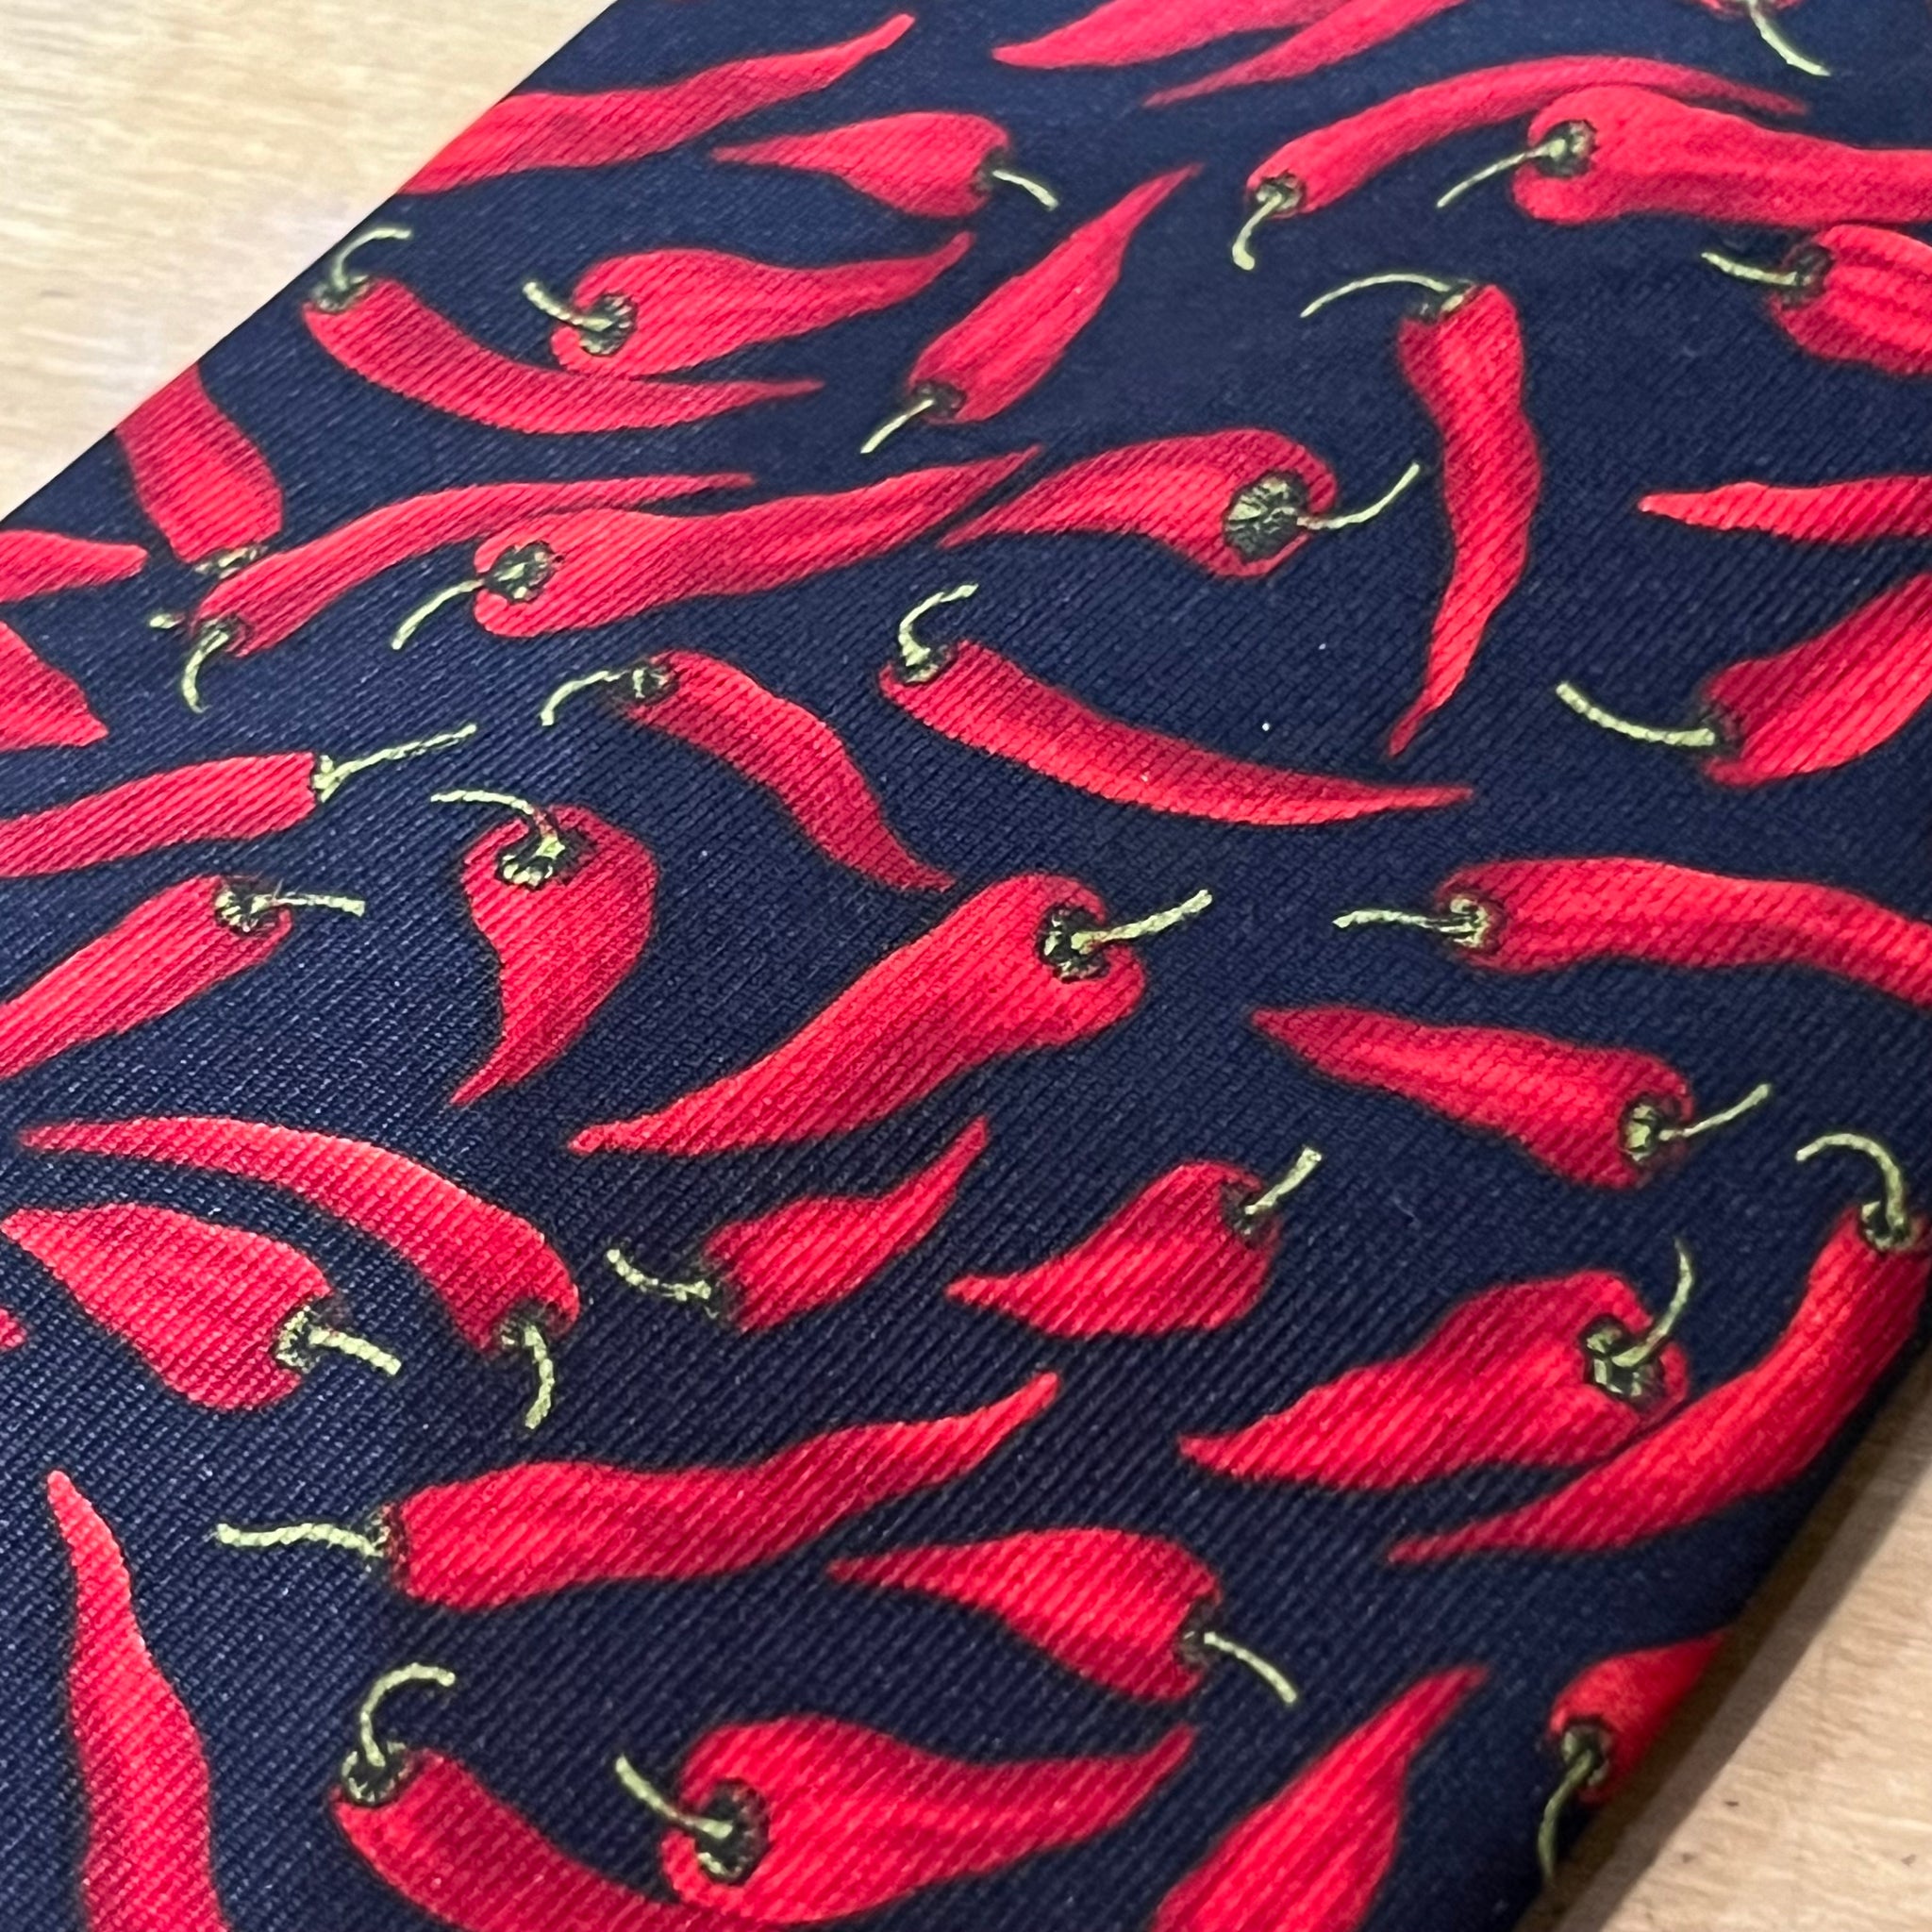 Silk Tie - Red Hot Chilli Peppers